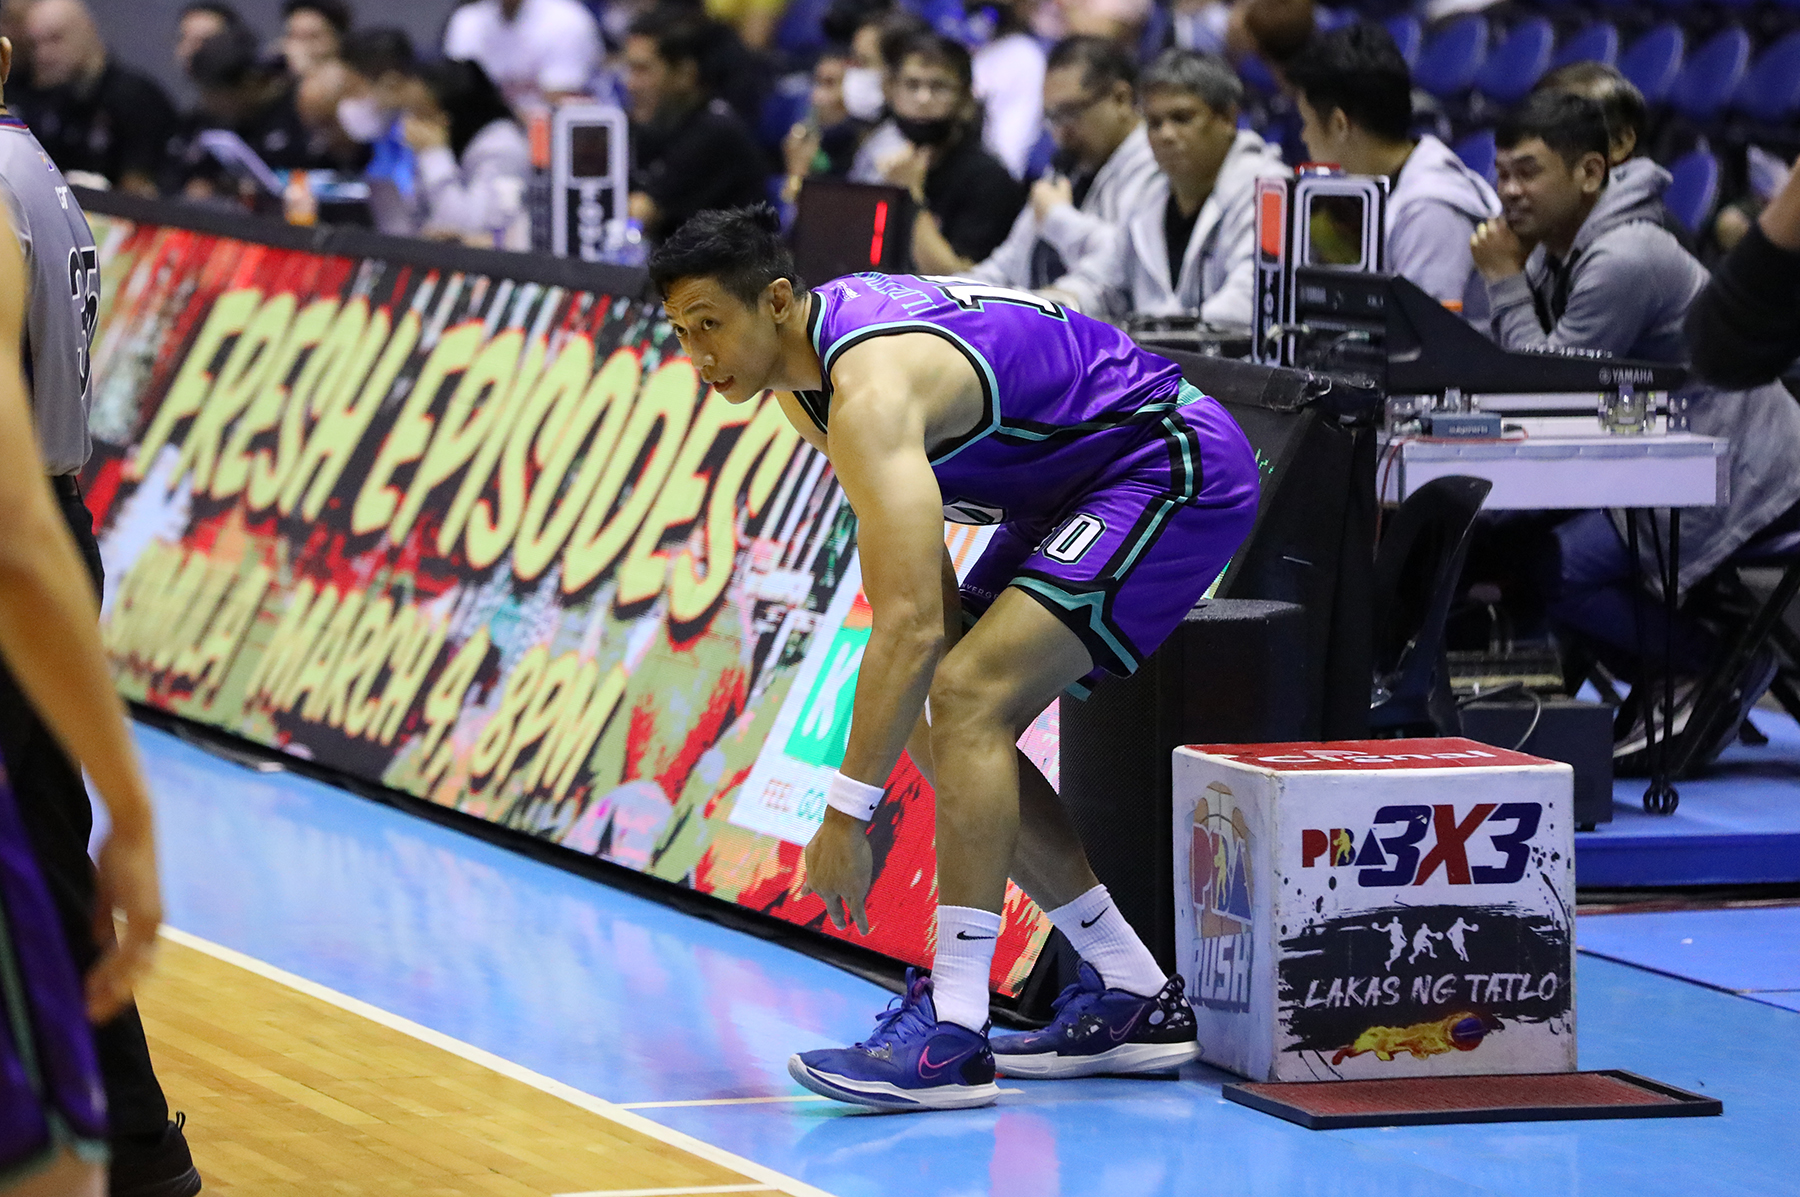 PBA great Danny lldefonso suits up for Converge. –PBA IMAGES